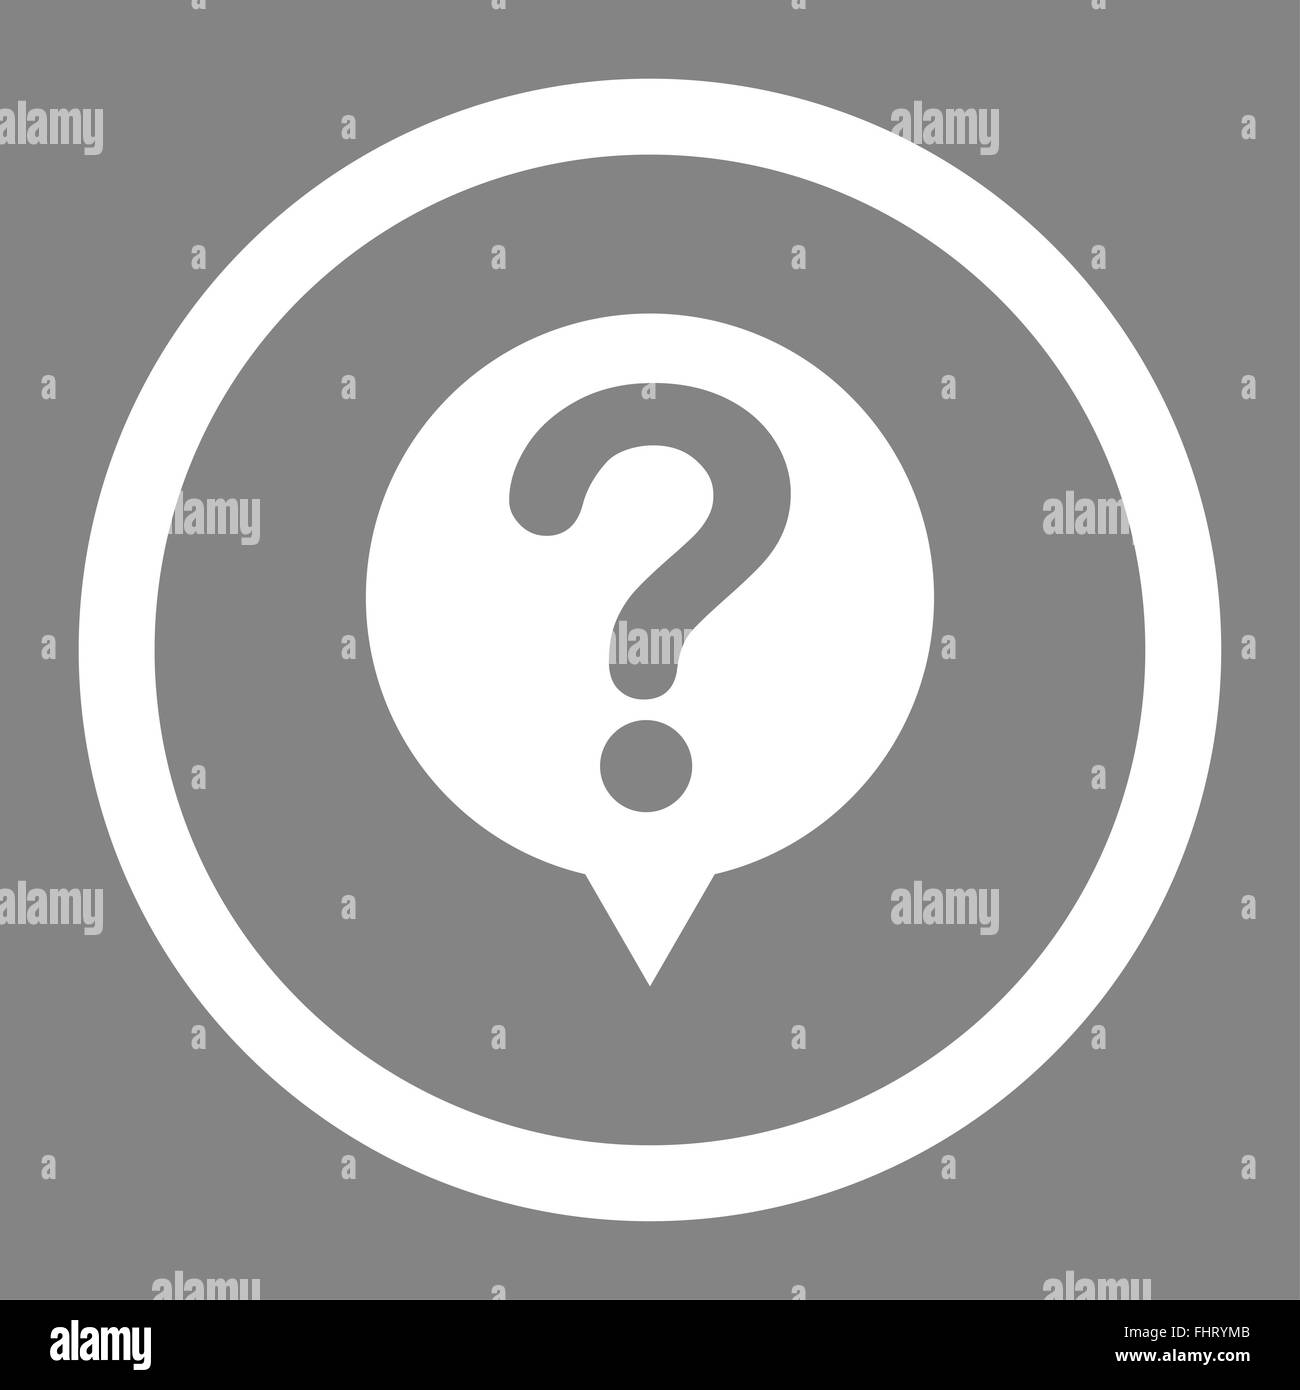 Status flat white color rounded vector icon Stock Photo